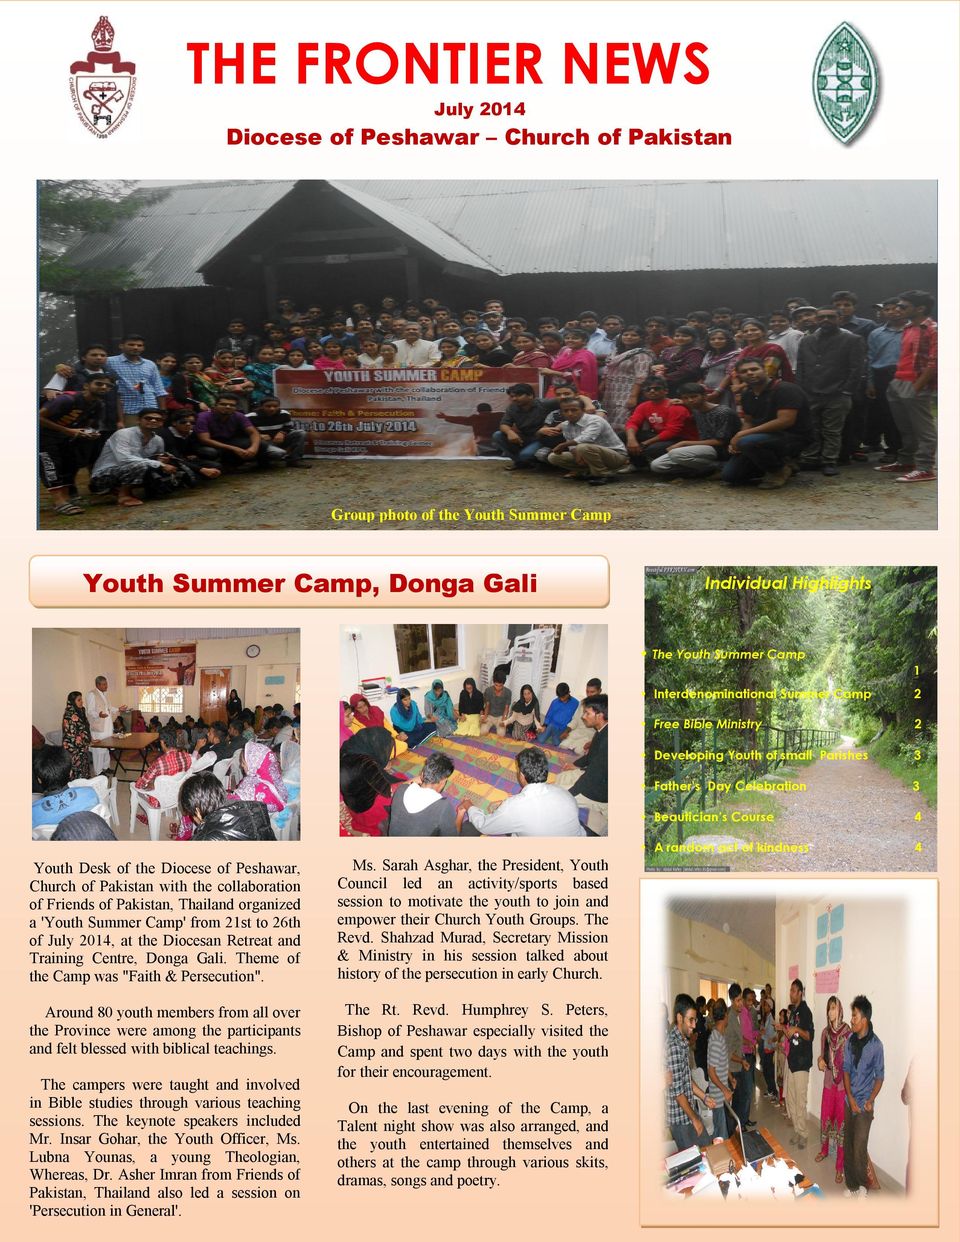 Theme of the Camp was "Faith & Persecution". Around 80 youth members from all over the Province were among the participants and felt blessed with biblical teachings.